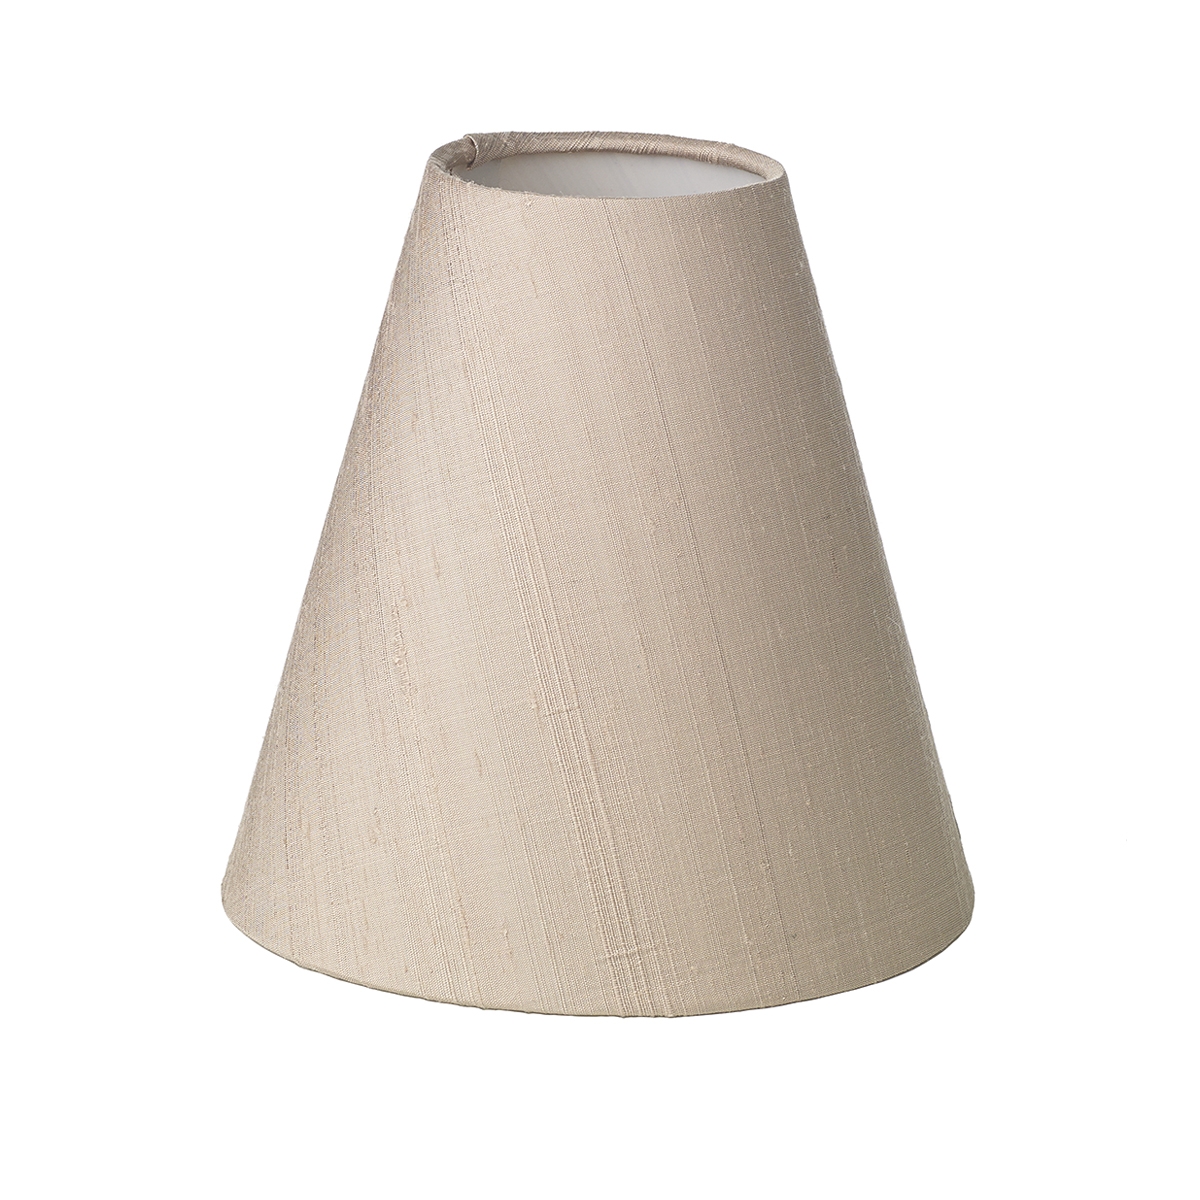 Doreen Small Conical Shade